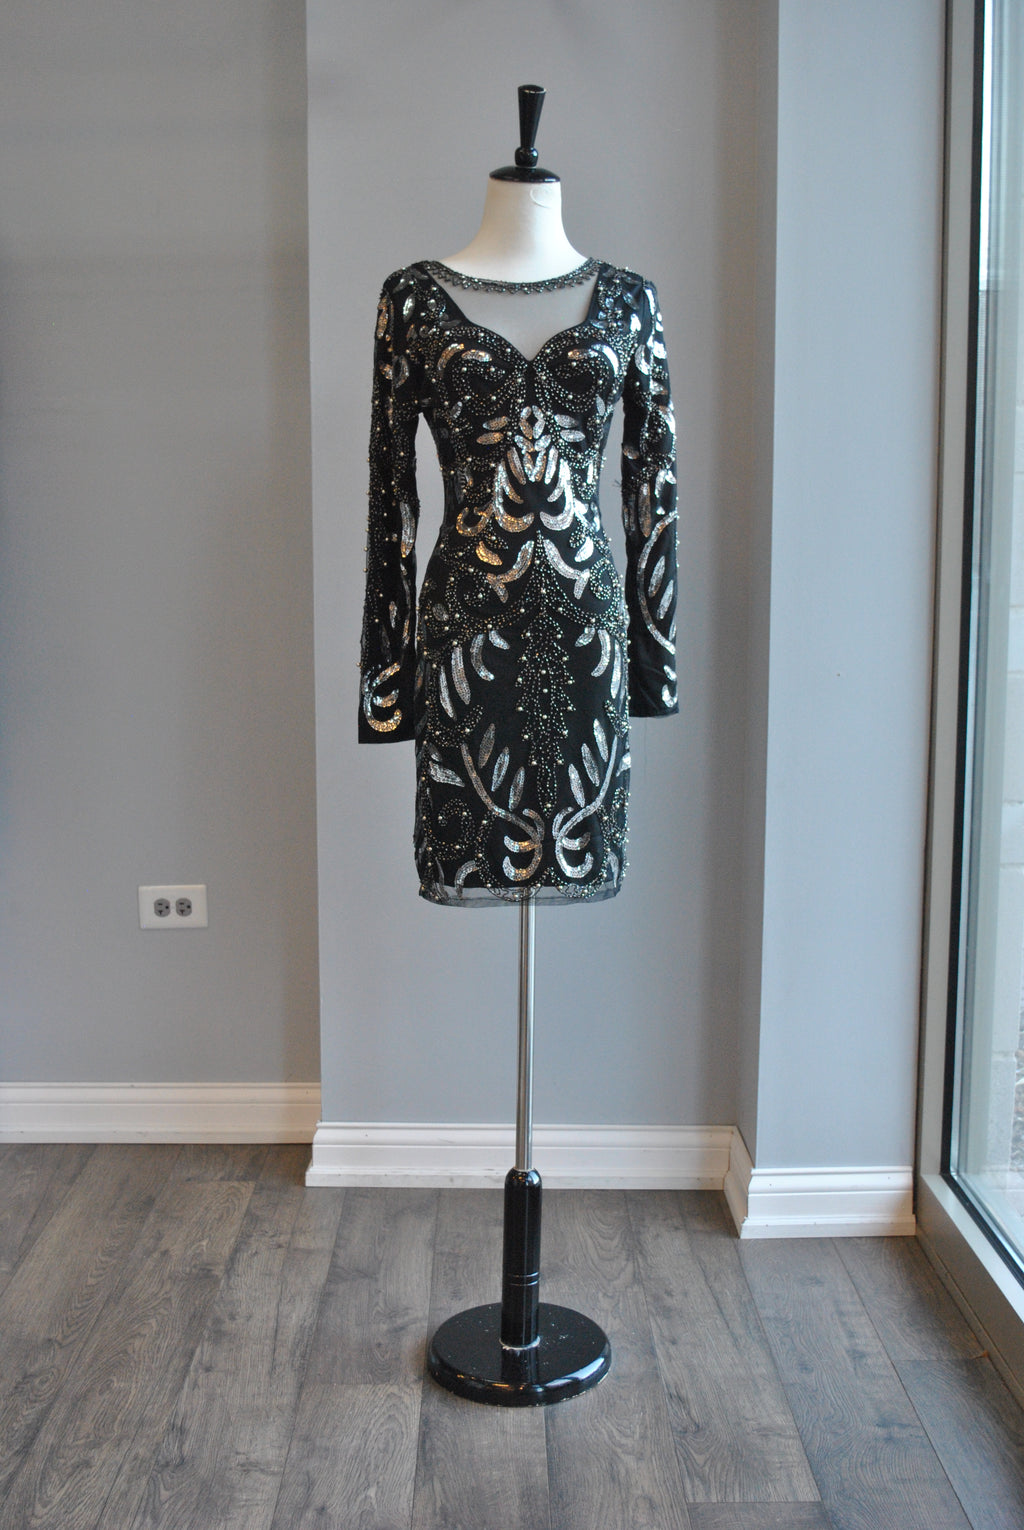 BLACK SEQUIN AND BEADS MINI PARTY DRESS